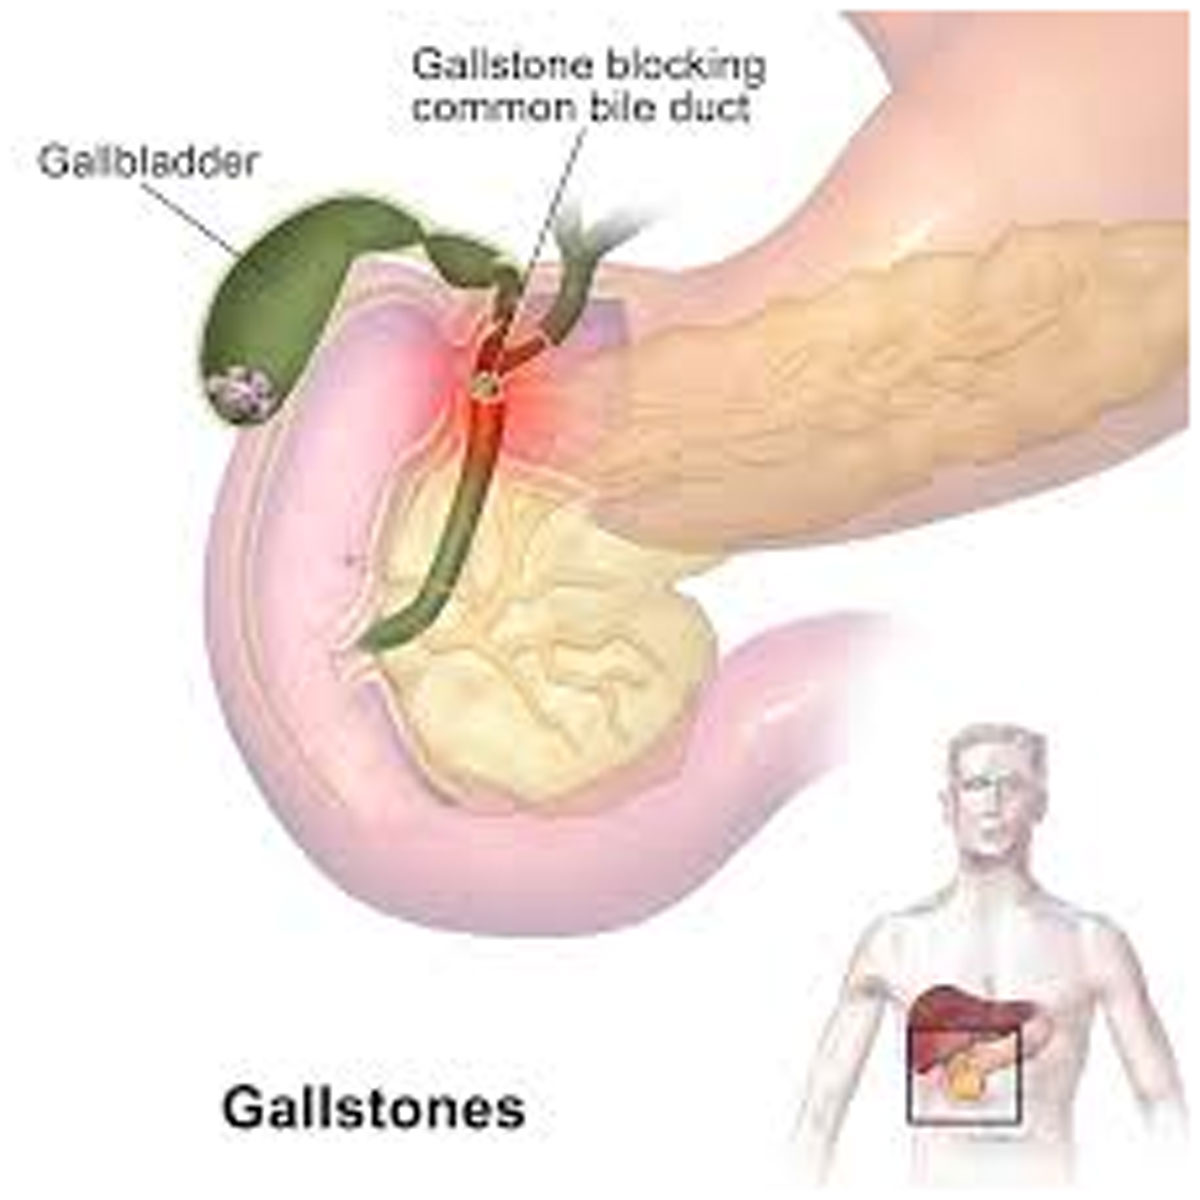 How to Reduce Gall Bladder Stones